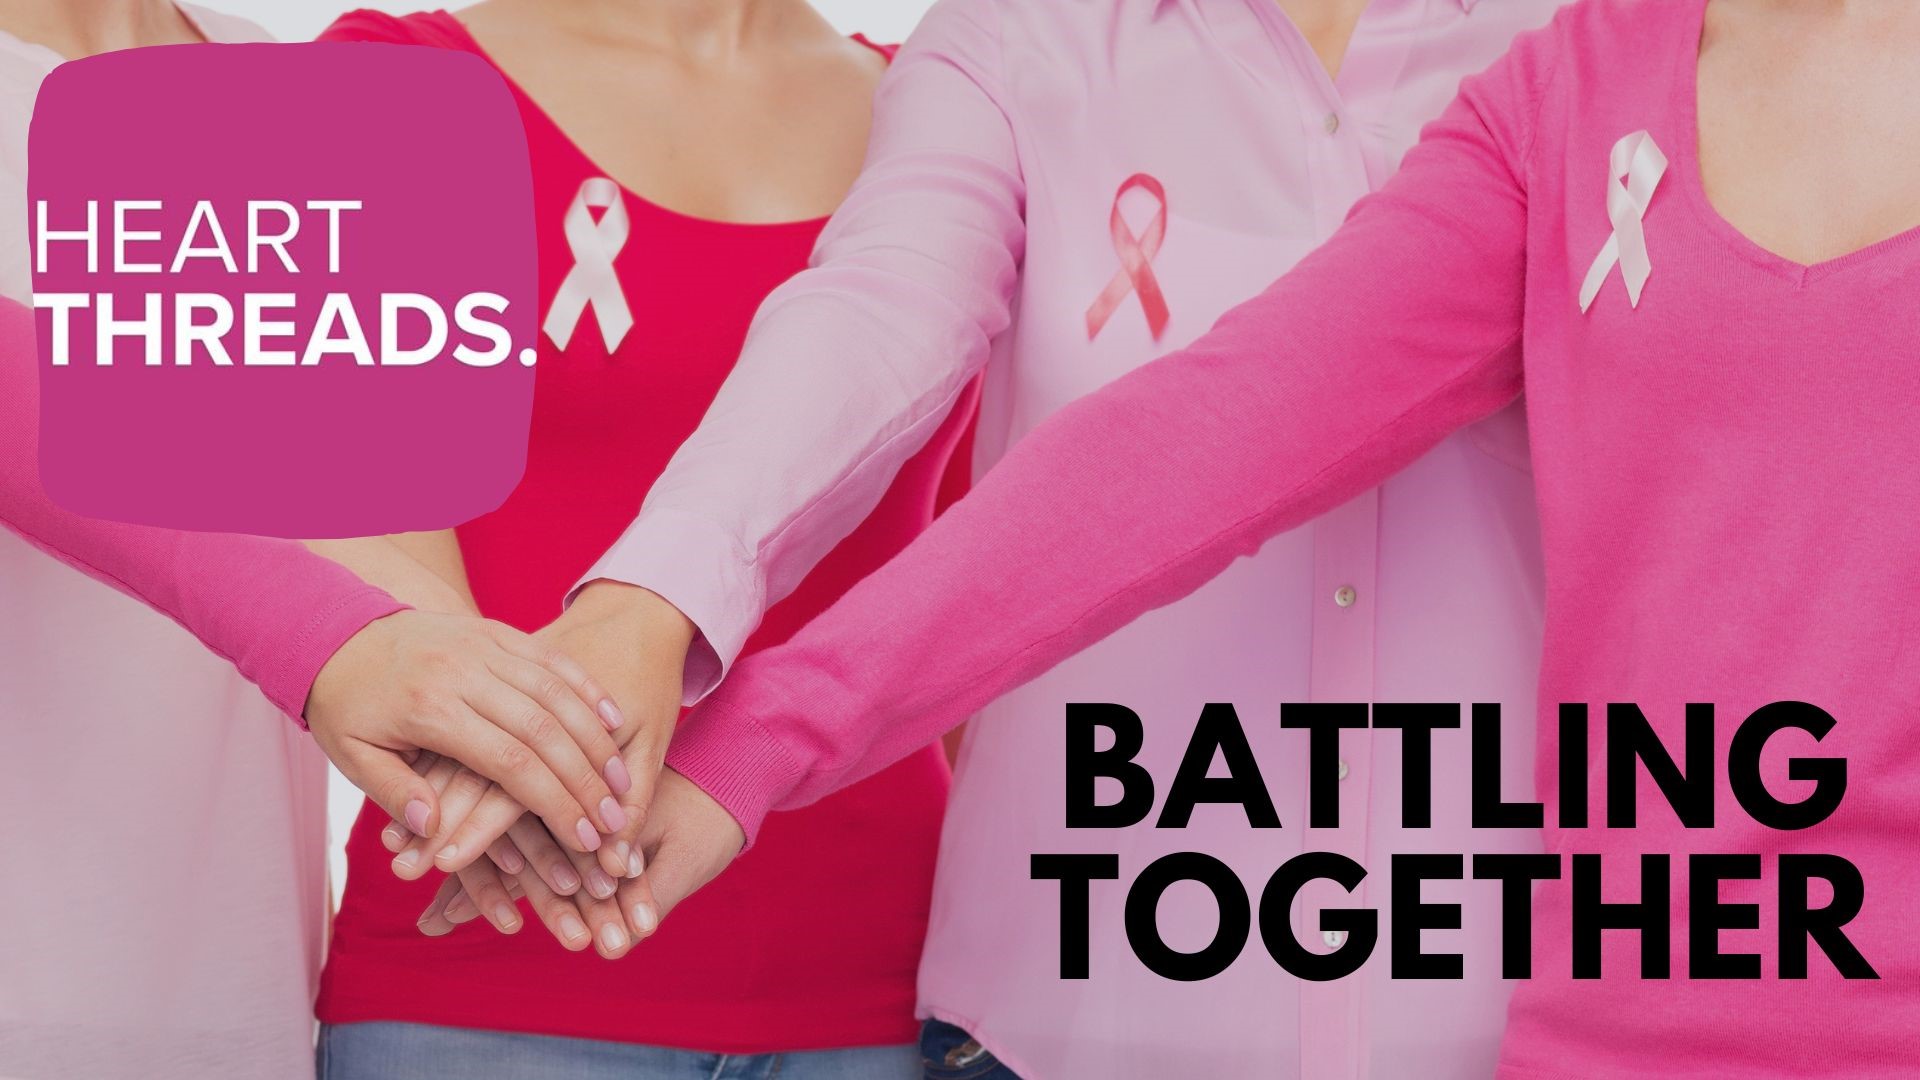 Receiving a breast cancer diagnosis is a life-changing moment. And it's one that has led to many people working together to help others as they battle it.